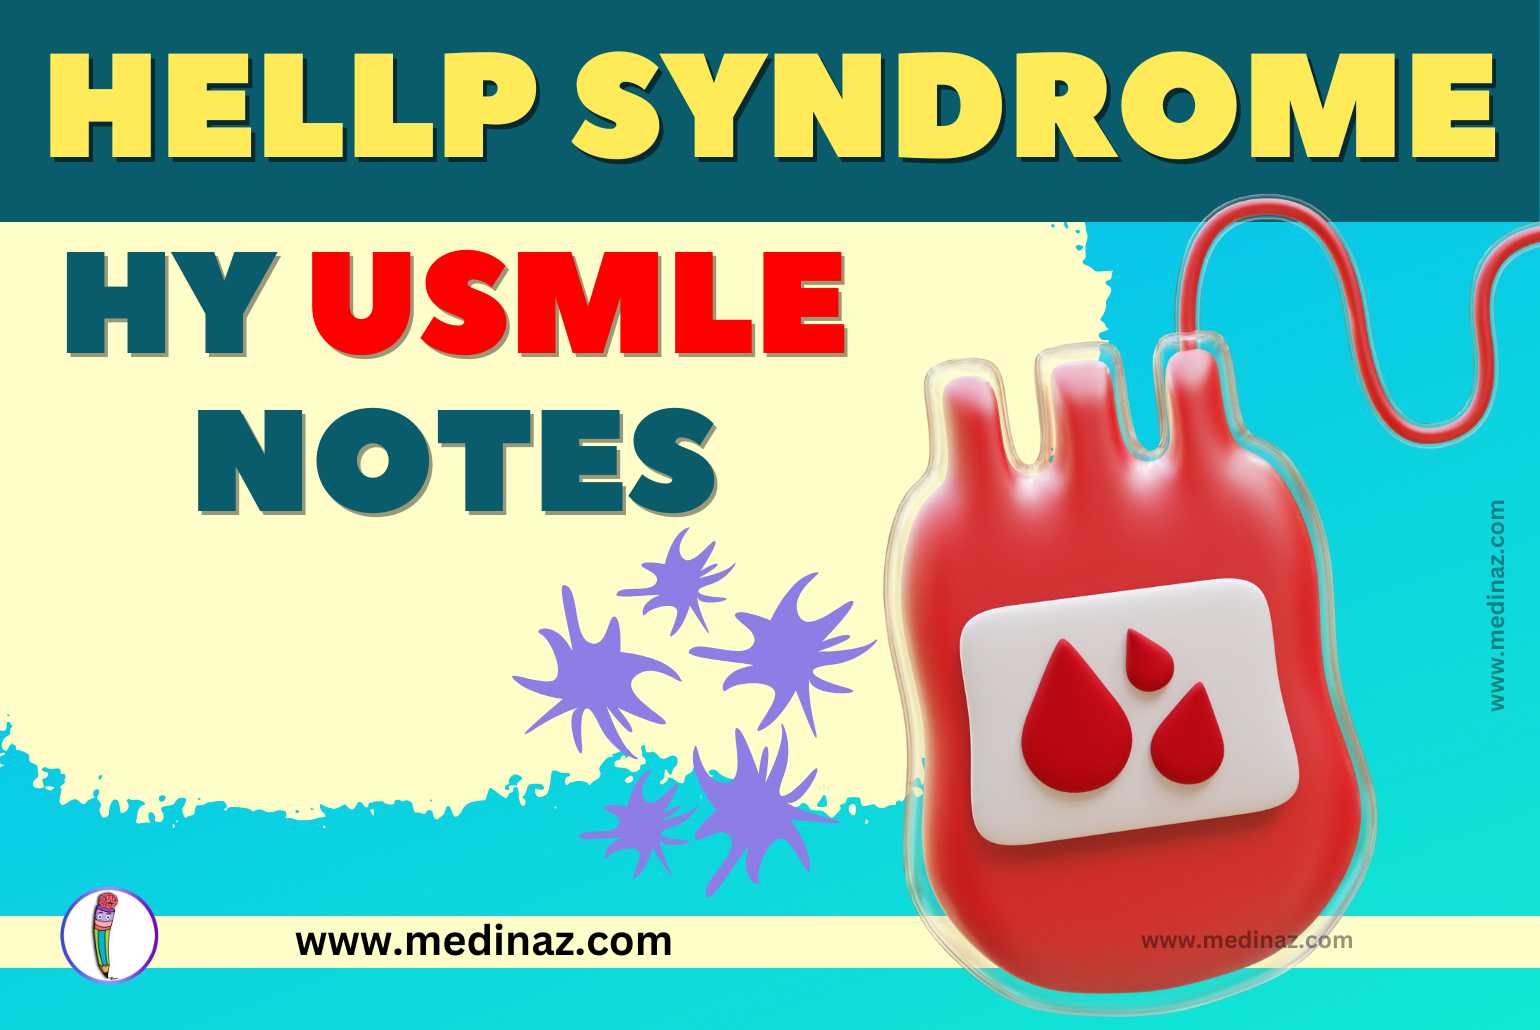 HELLP Syndrome USMLE Notes